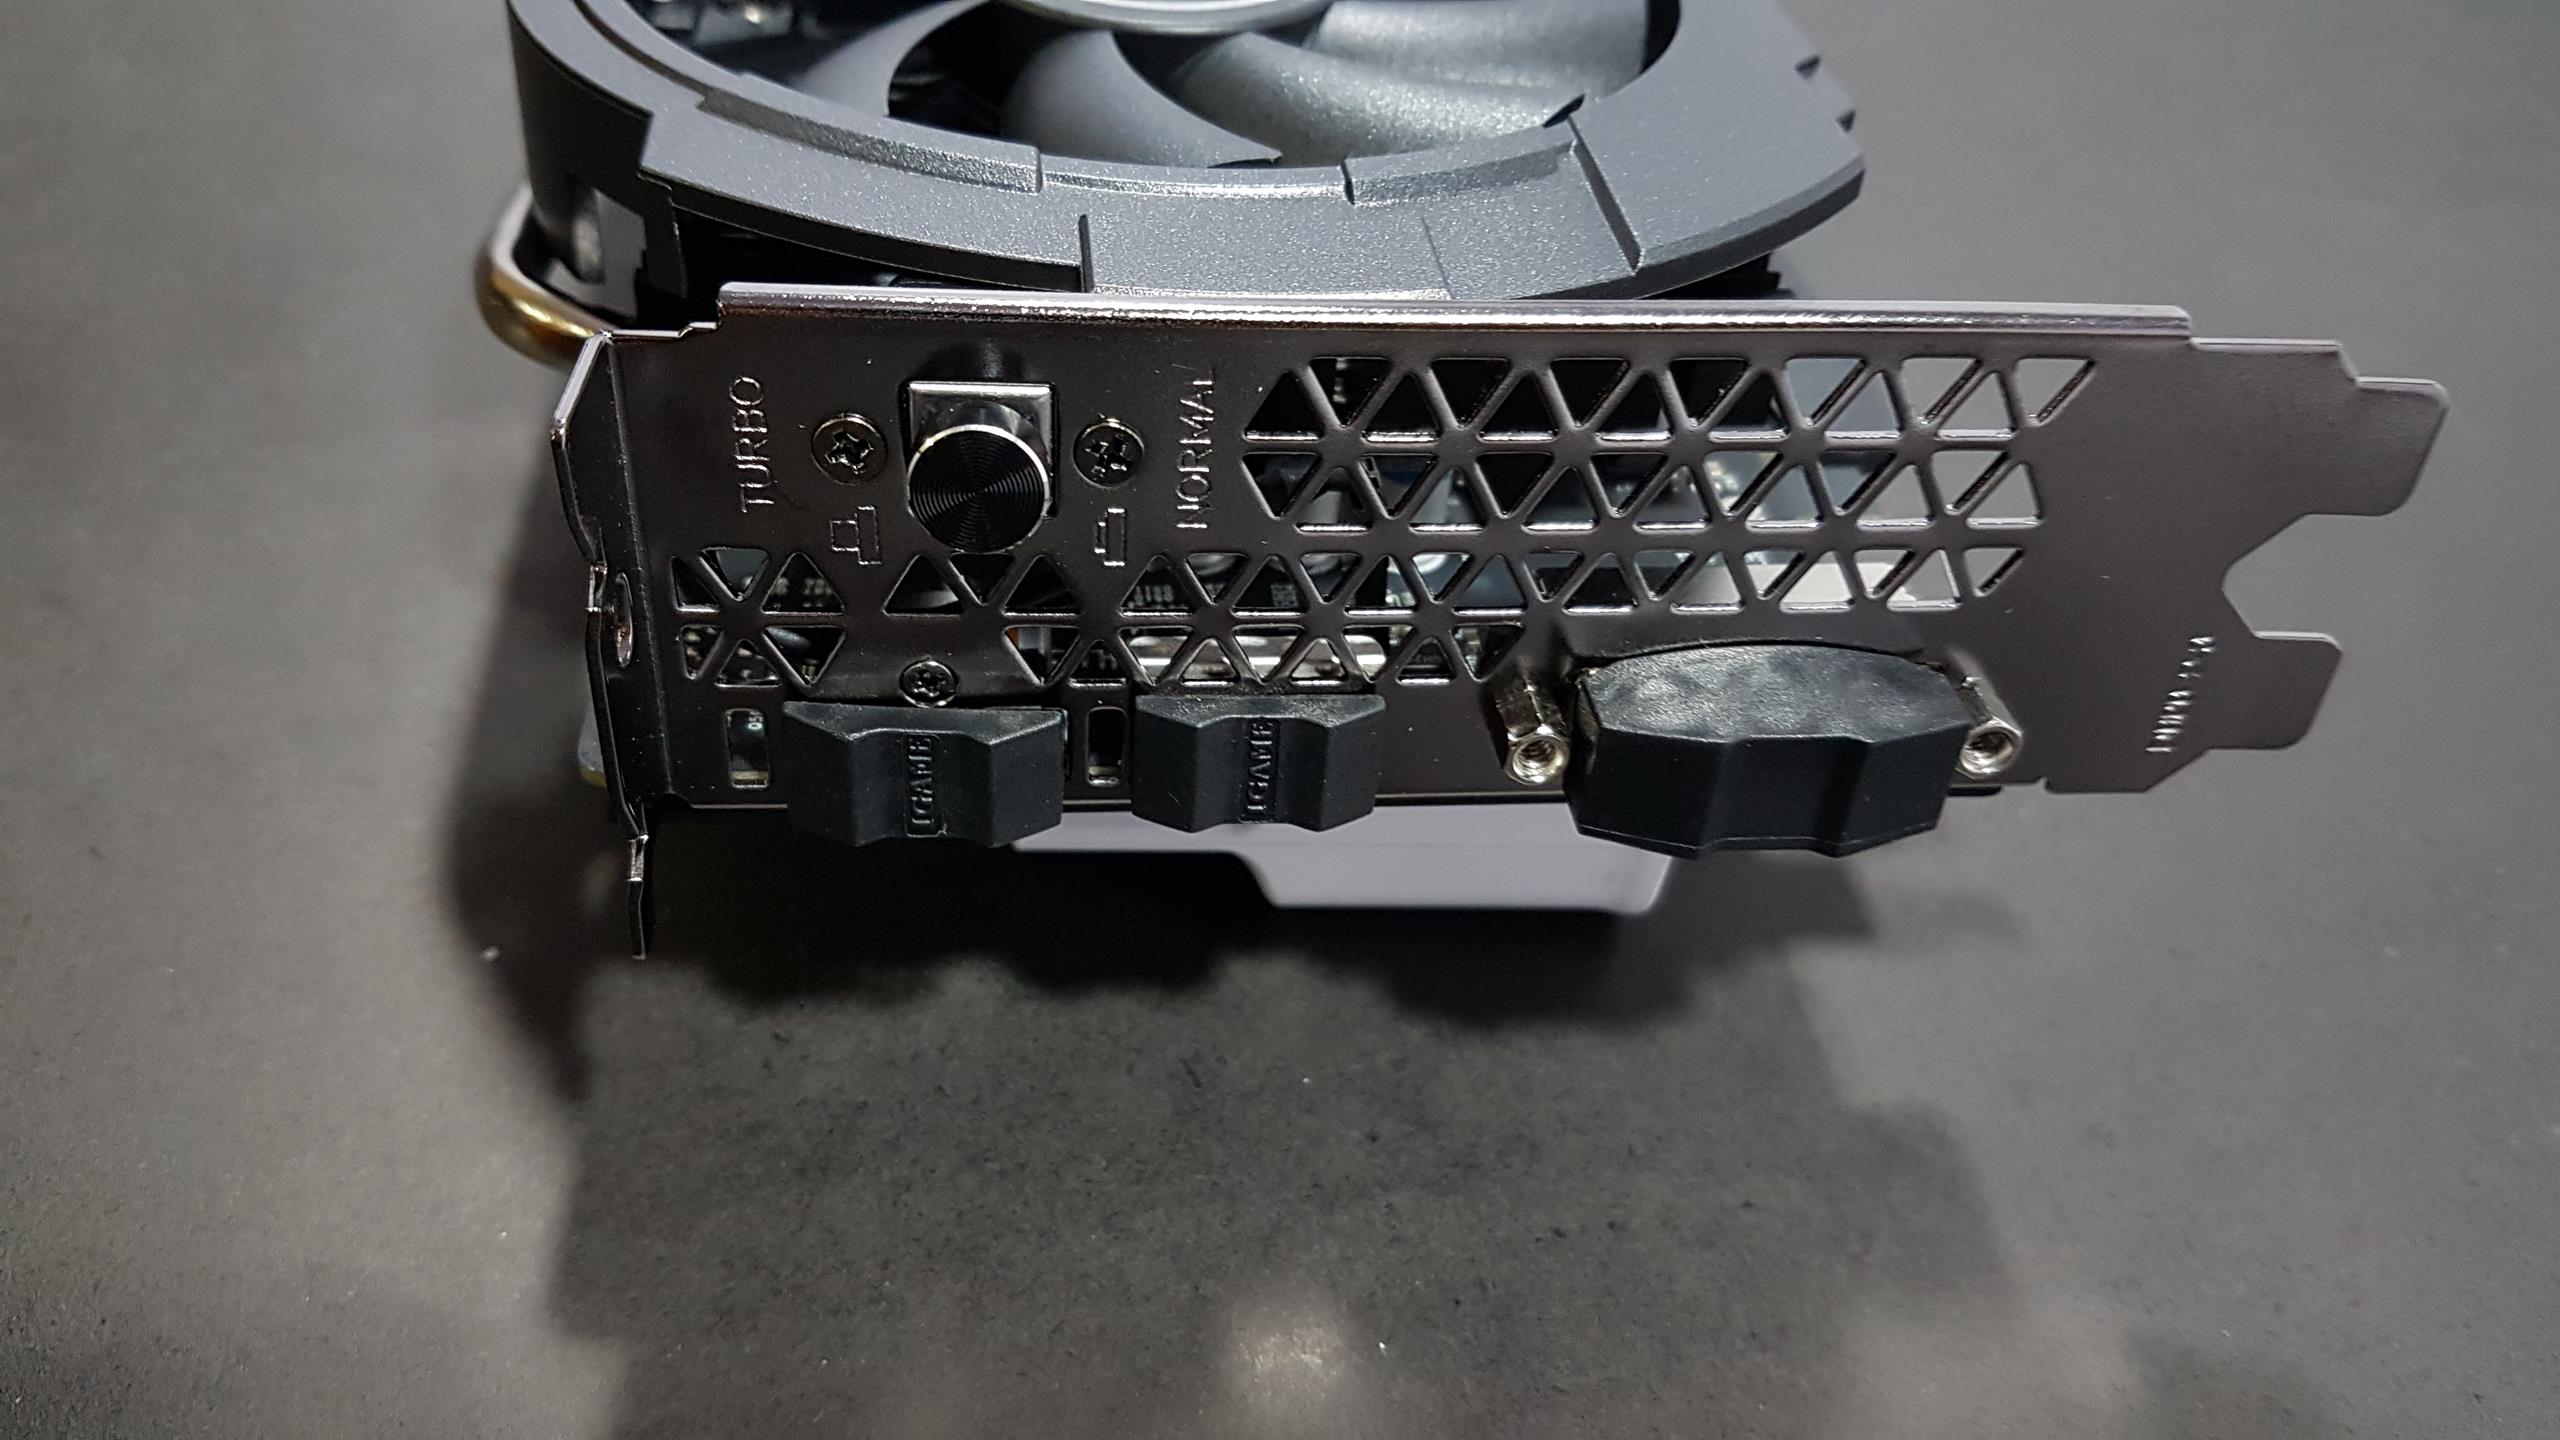 1050ti Review Closer Look front Side Of the Card 